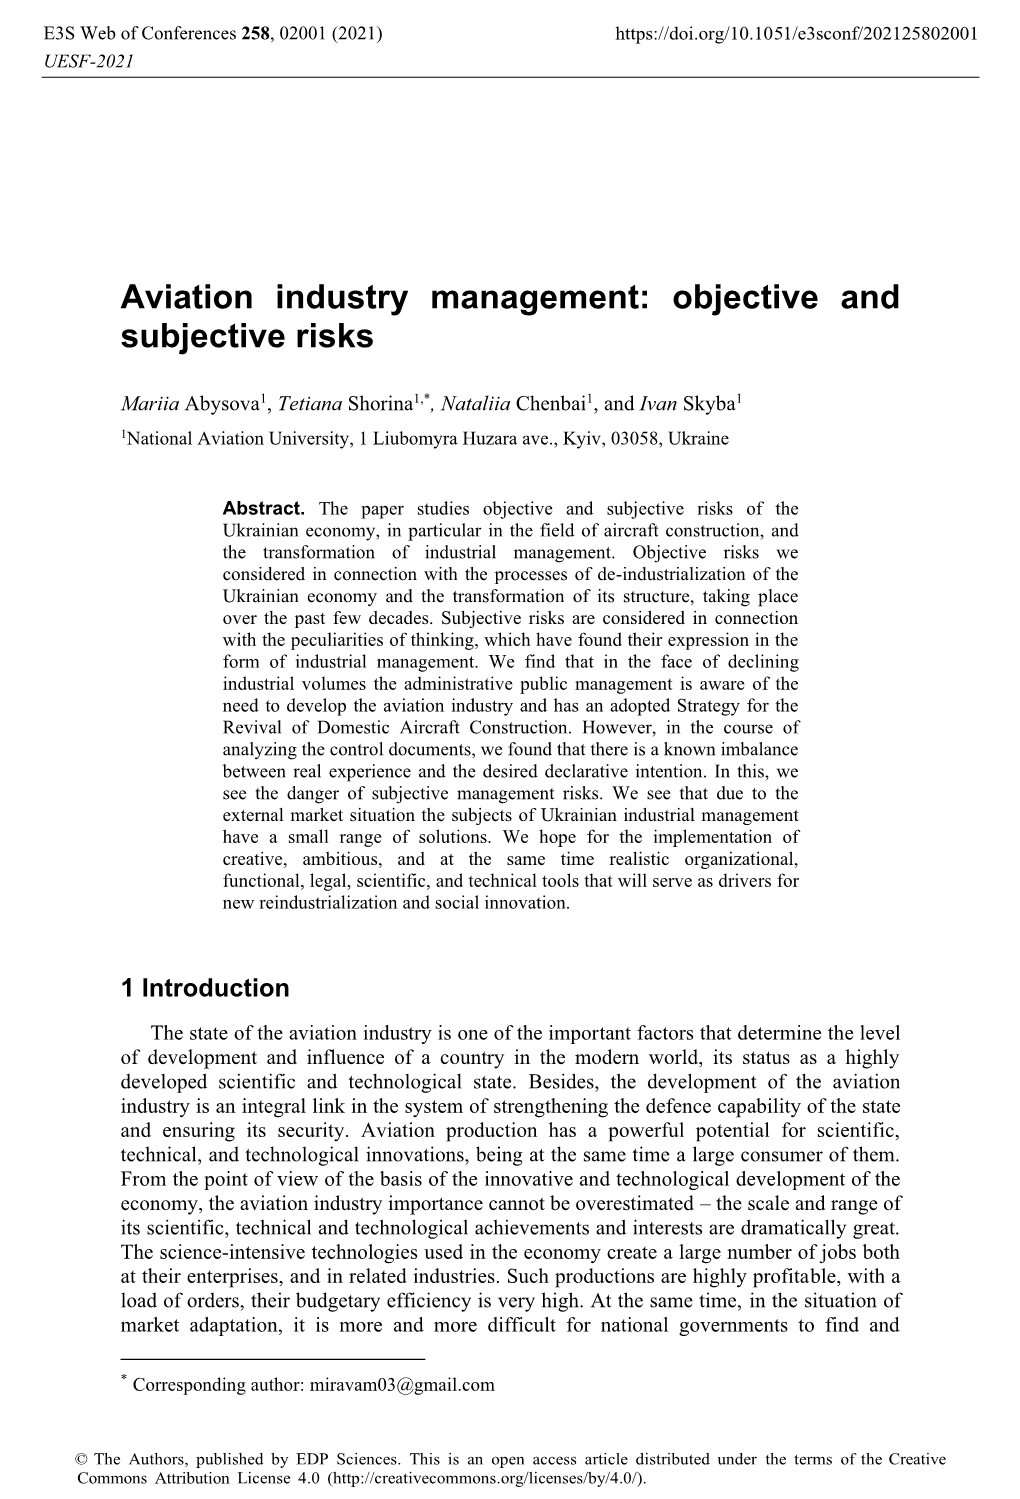 Aviation Industry Management: Objective and Subjective Risks